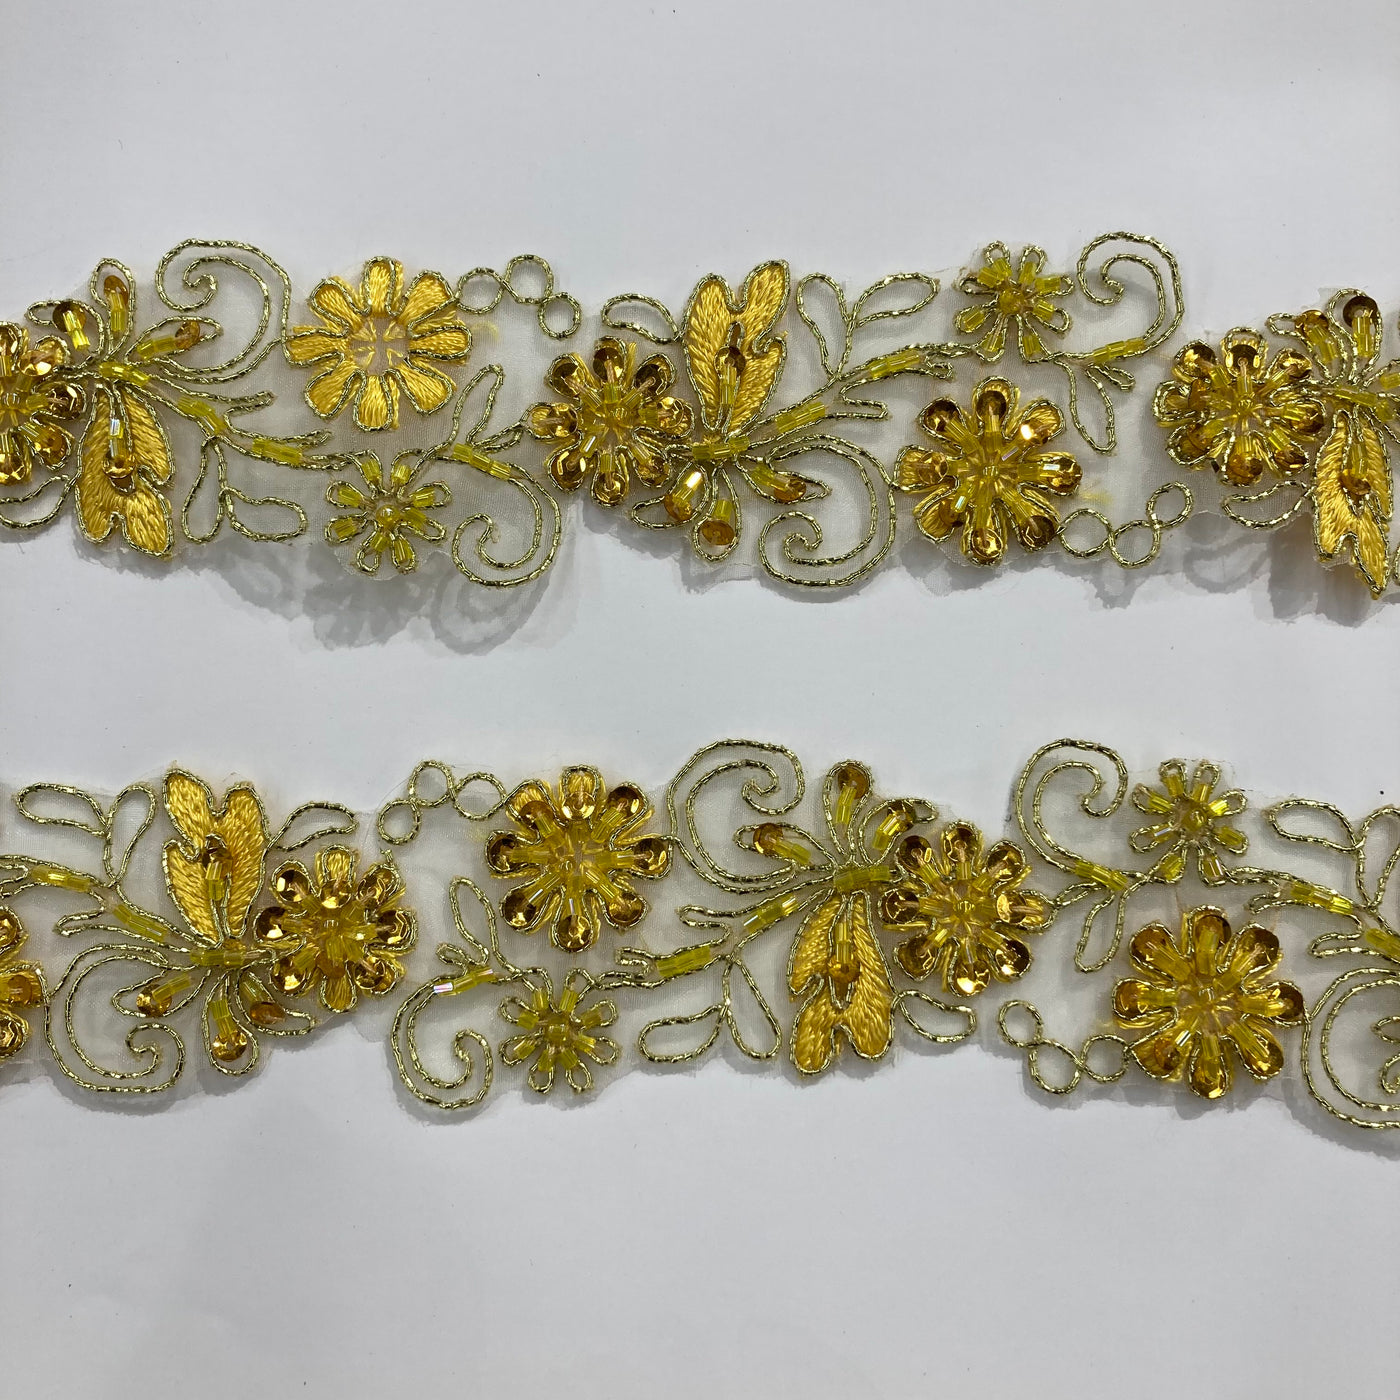 Beaded, Corded & Embroidered Yellow with Gold Trimming. Lace Usa